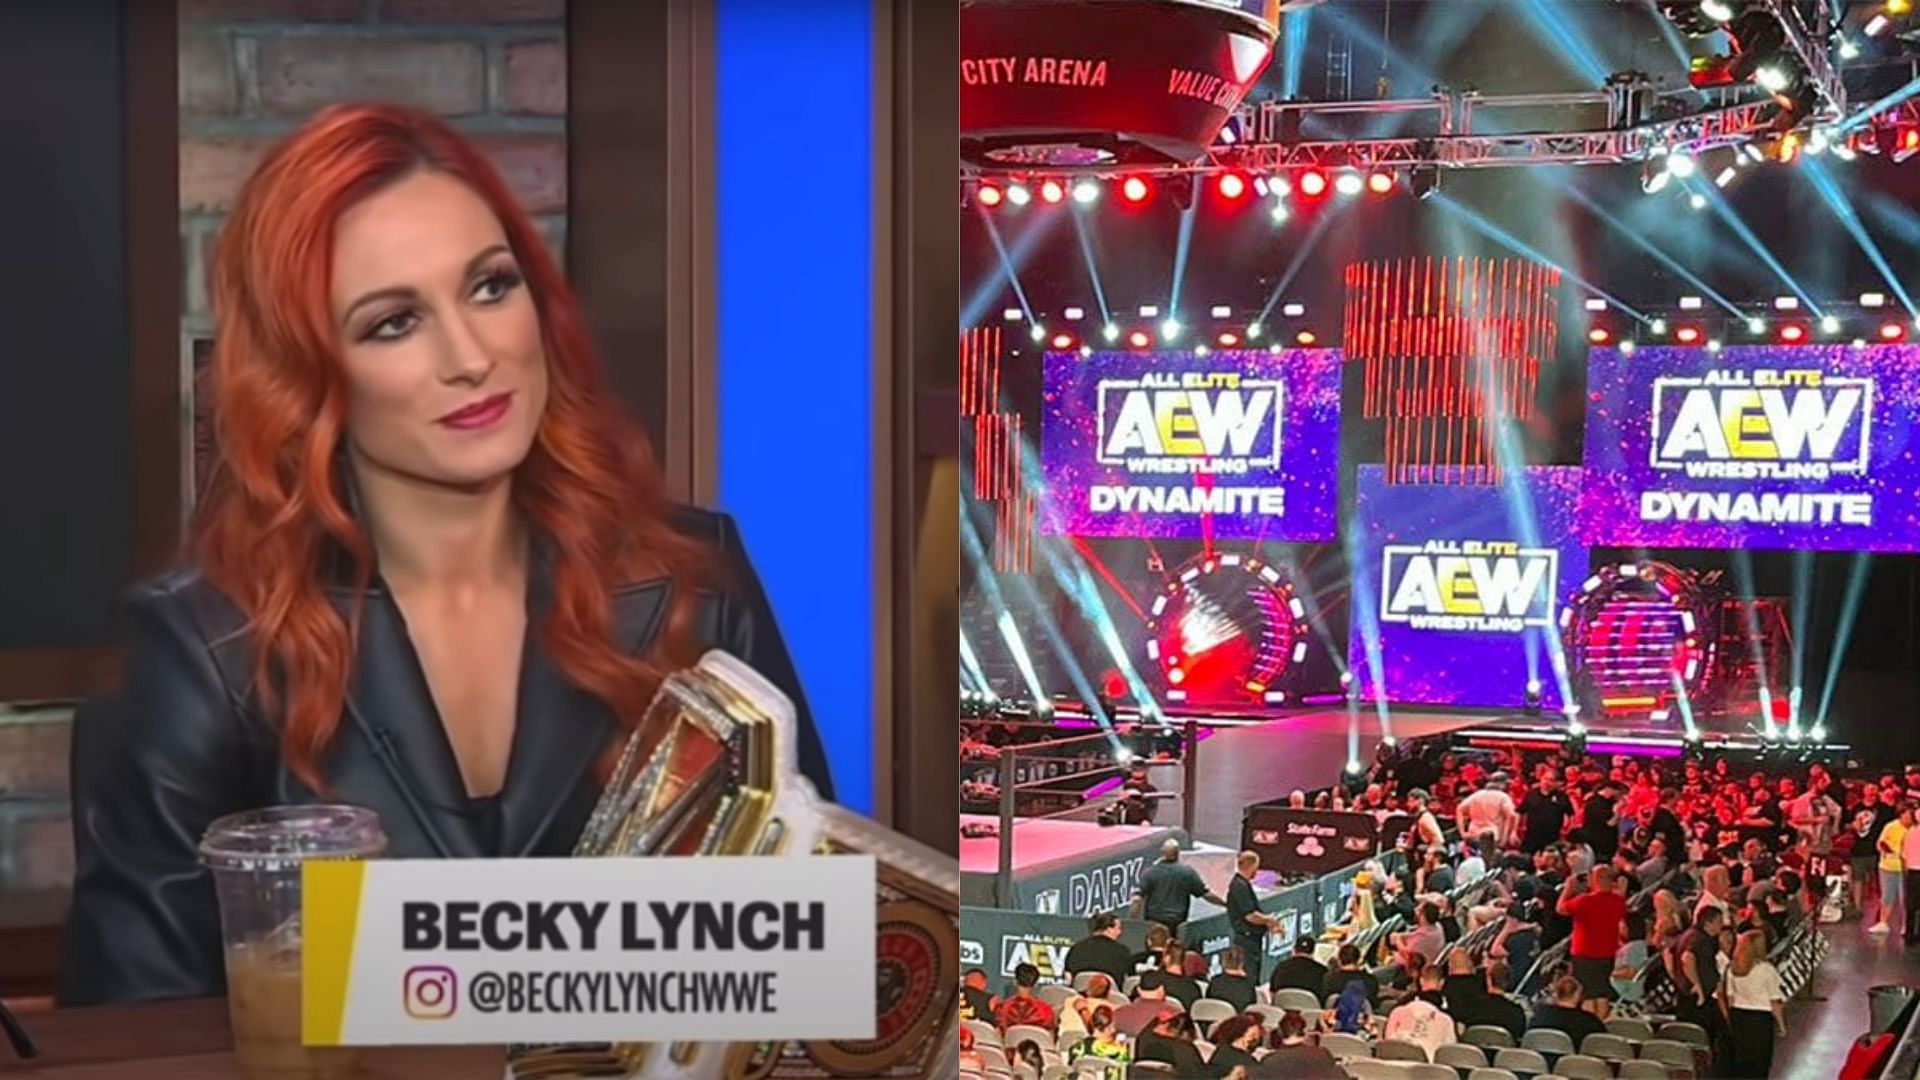 What did Becky Lynch think about AEW?